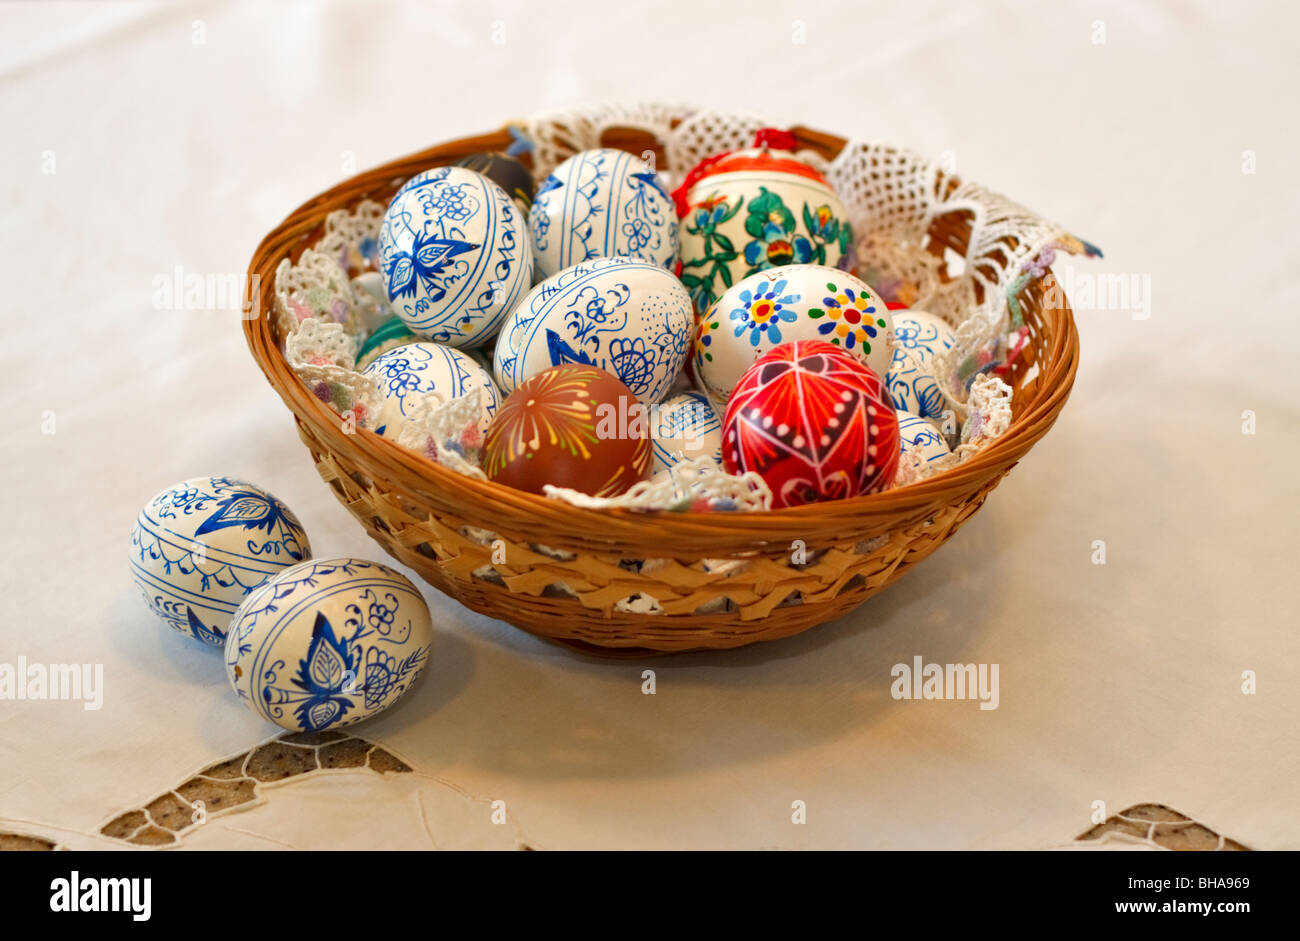 Basket of hand decorated traditional Easter eggs Stock Photo